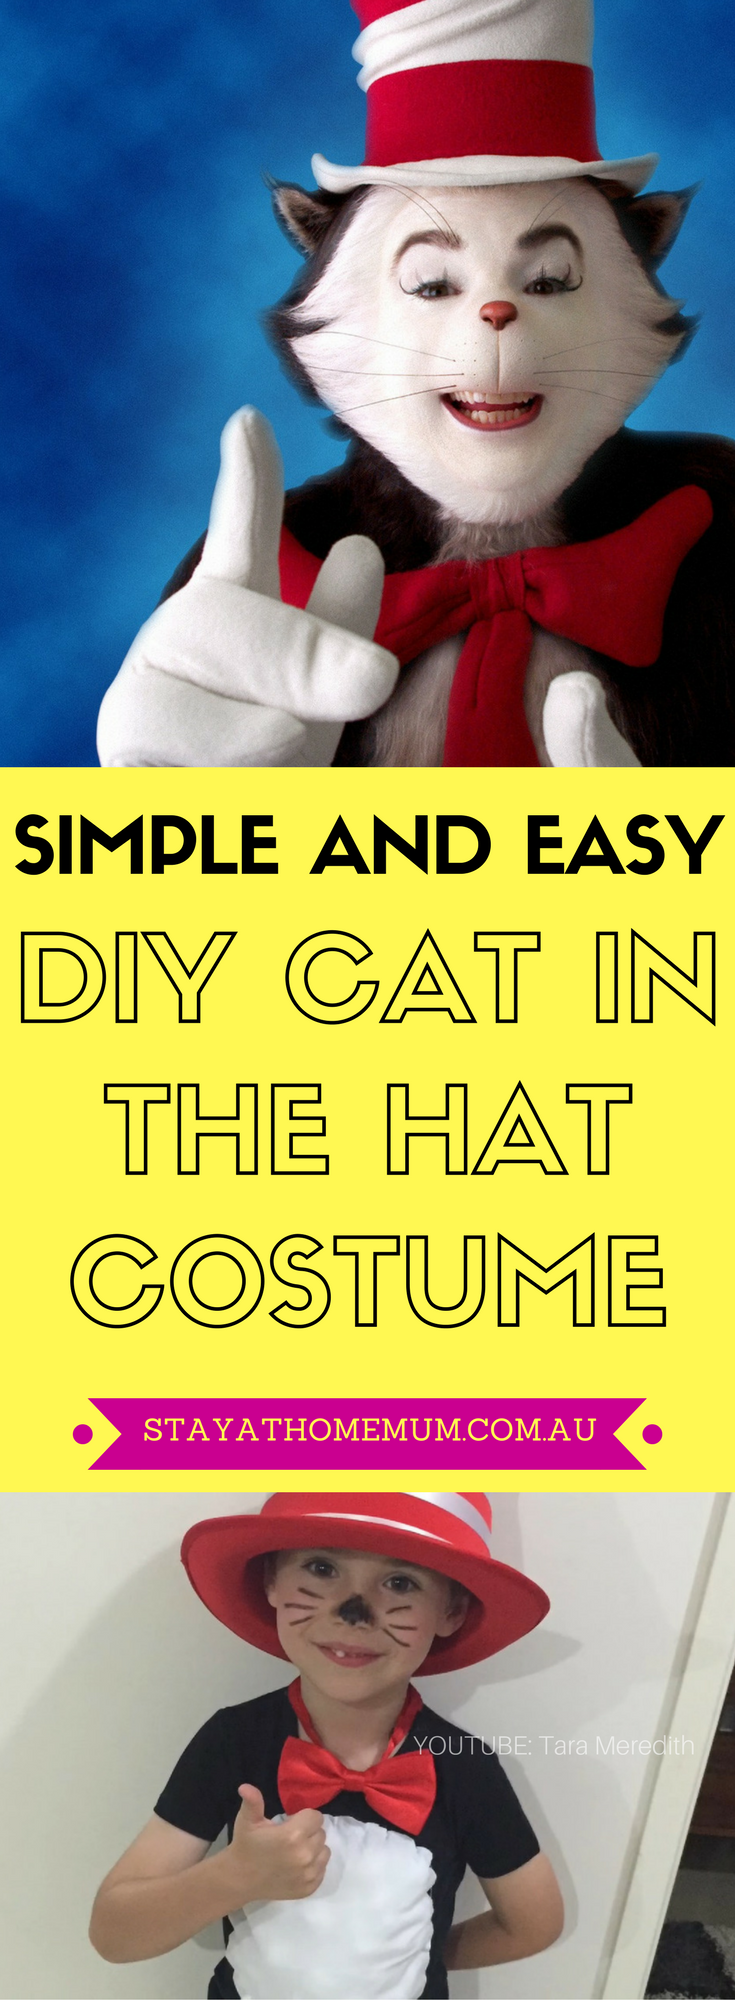 Simple And Easy DIY Cat In The Hat Costume - Stay at Home Mum